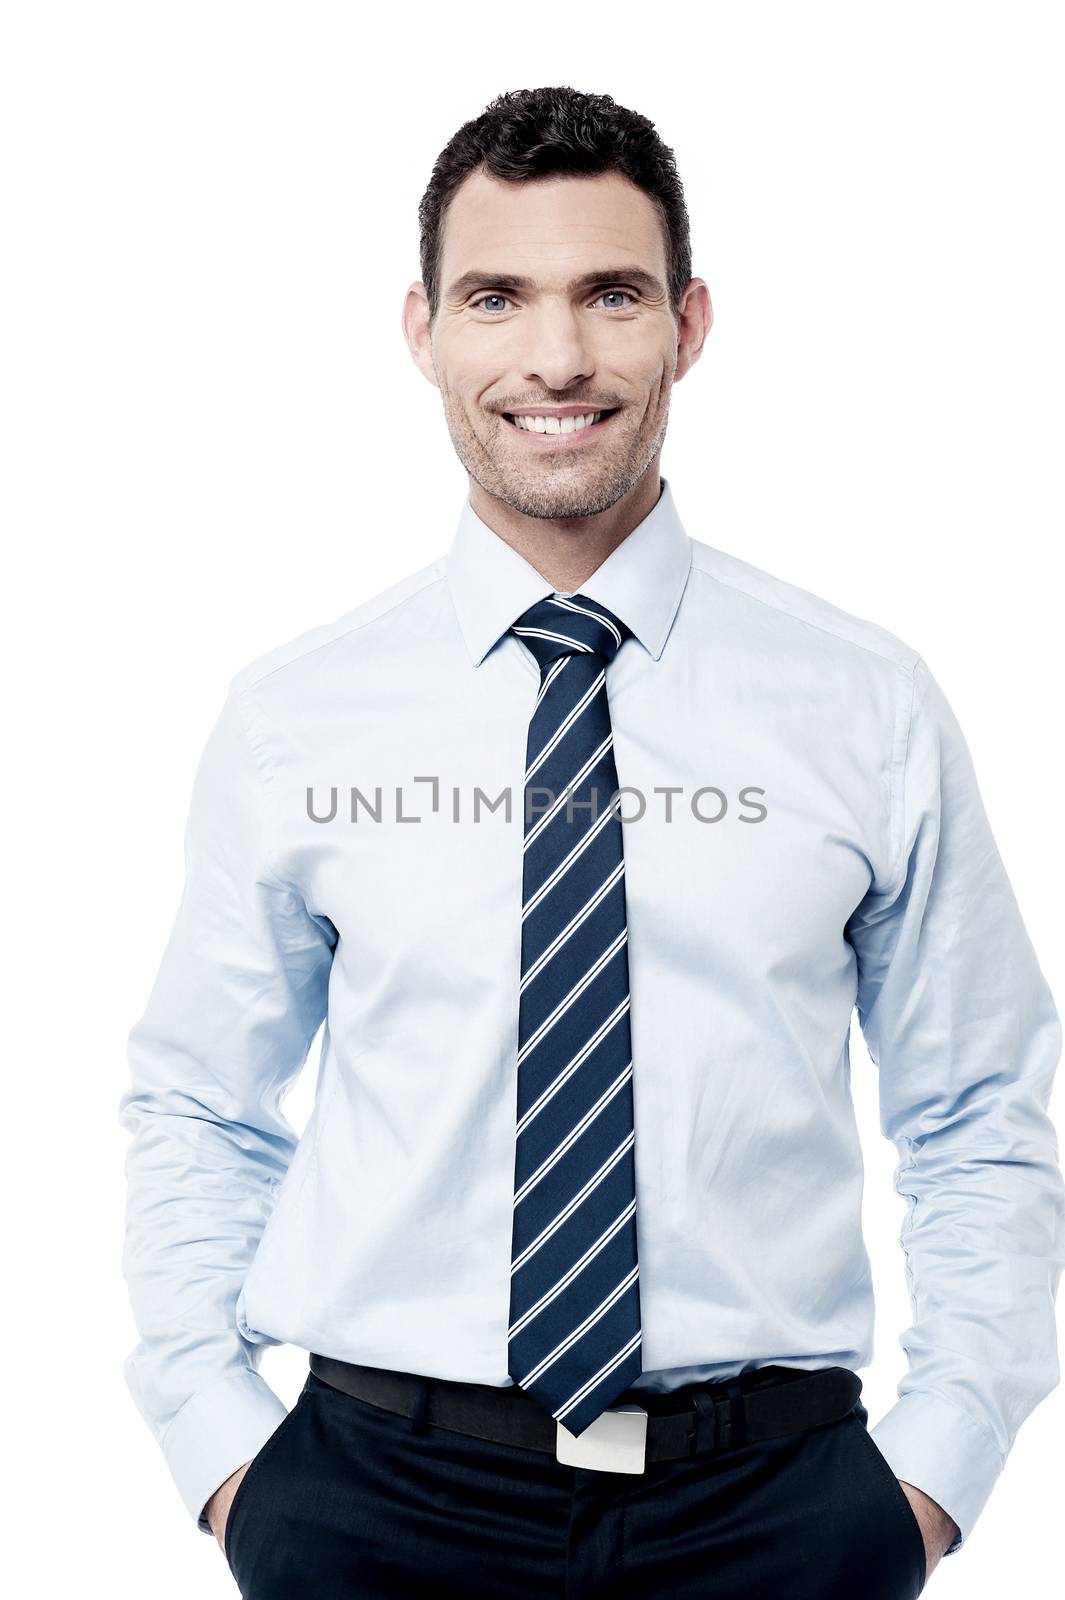 Smiling male executive posing with hands in pockets